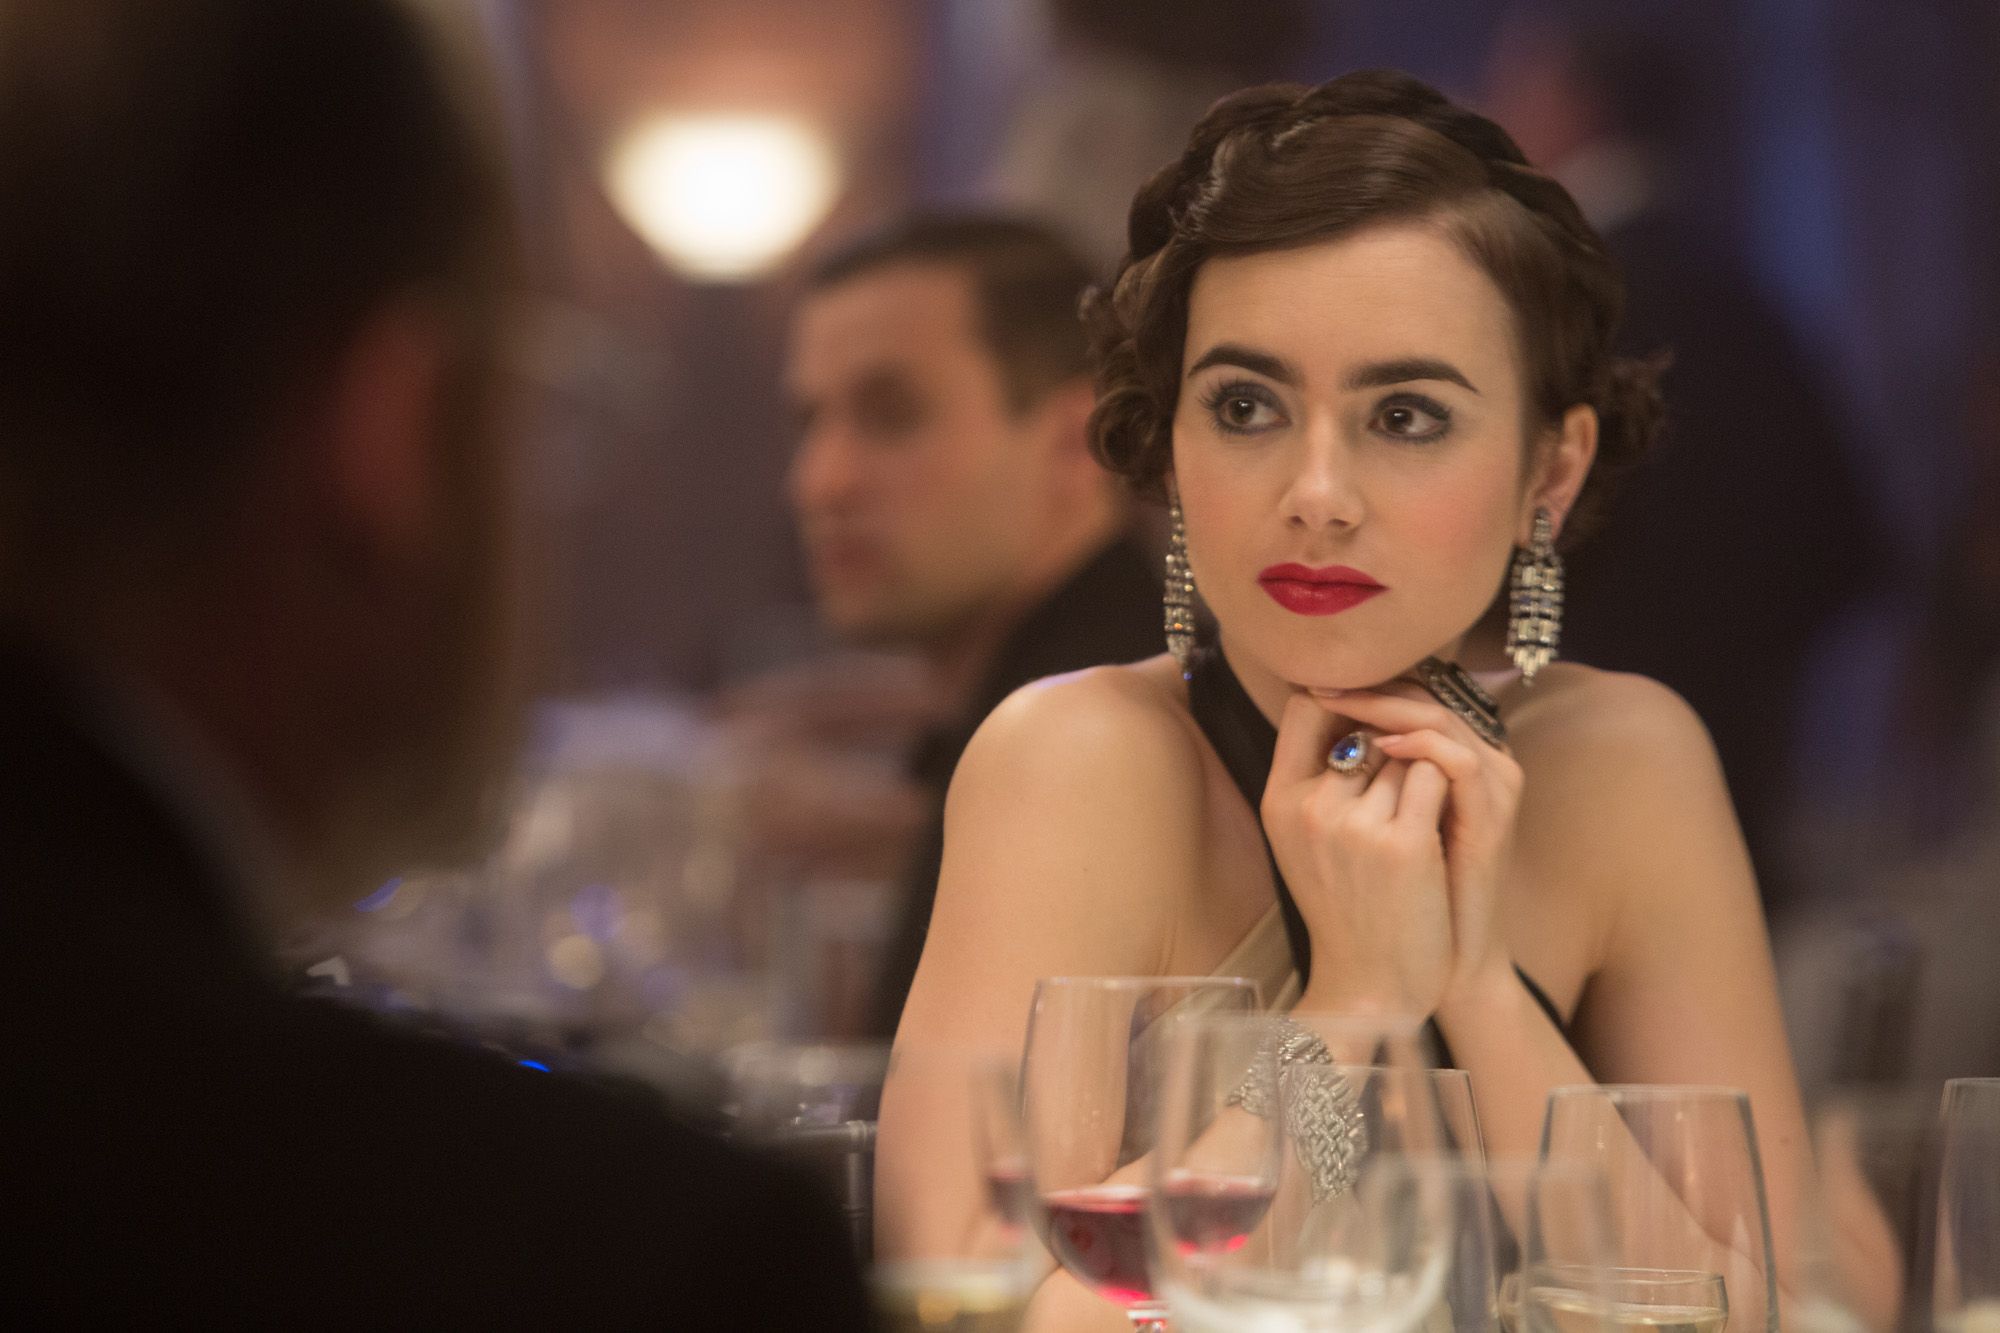 Lily Collins Porn - Lily Collins on Starring in 'The Last Tycoon'- 'The Last Tycoon' on Amazon